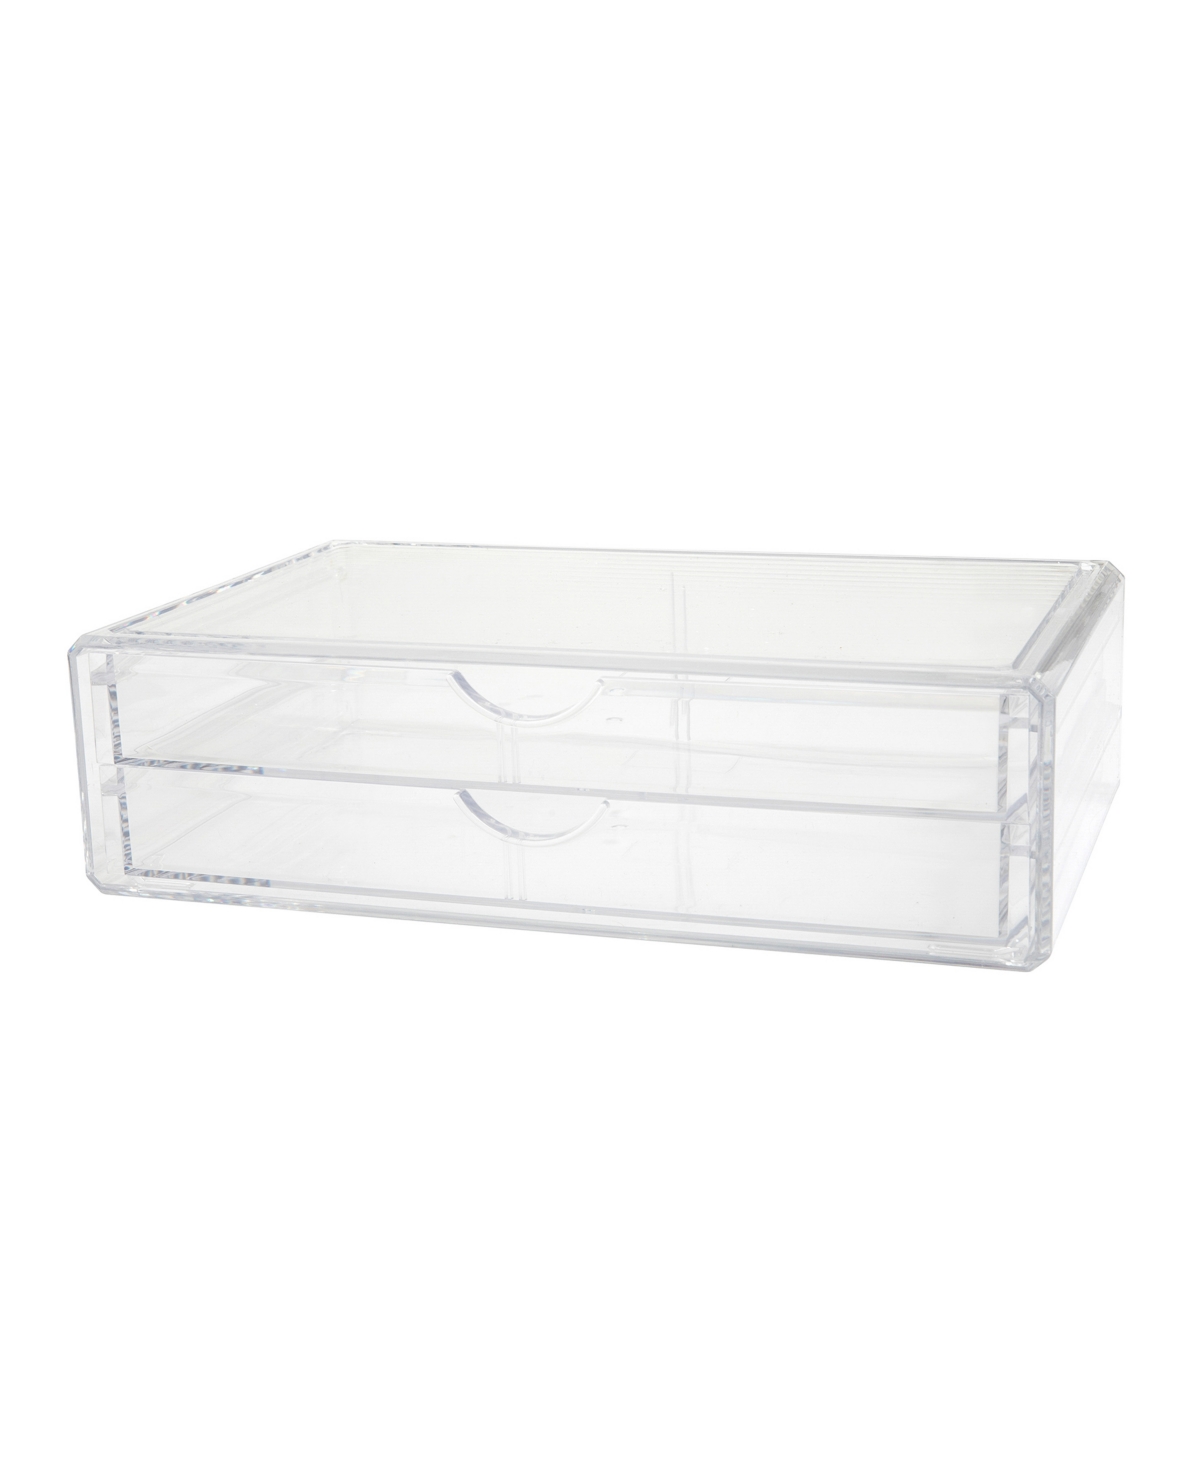 Brody Plastic Stackable Office Desktop Organizer Box with 2 Drawers, 12.75" x 7.75" - Clear